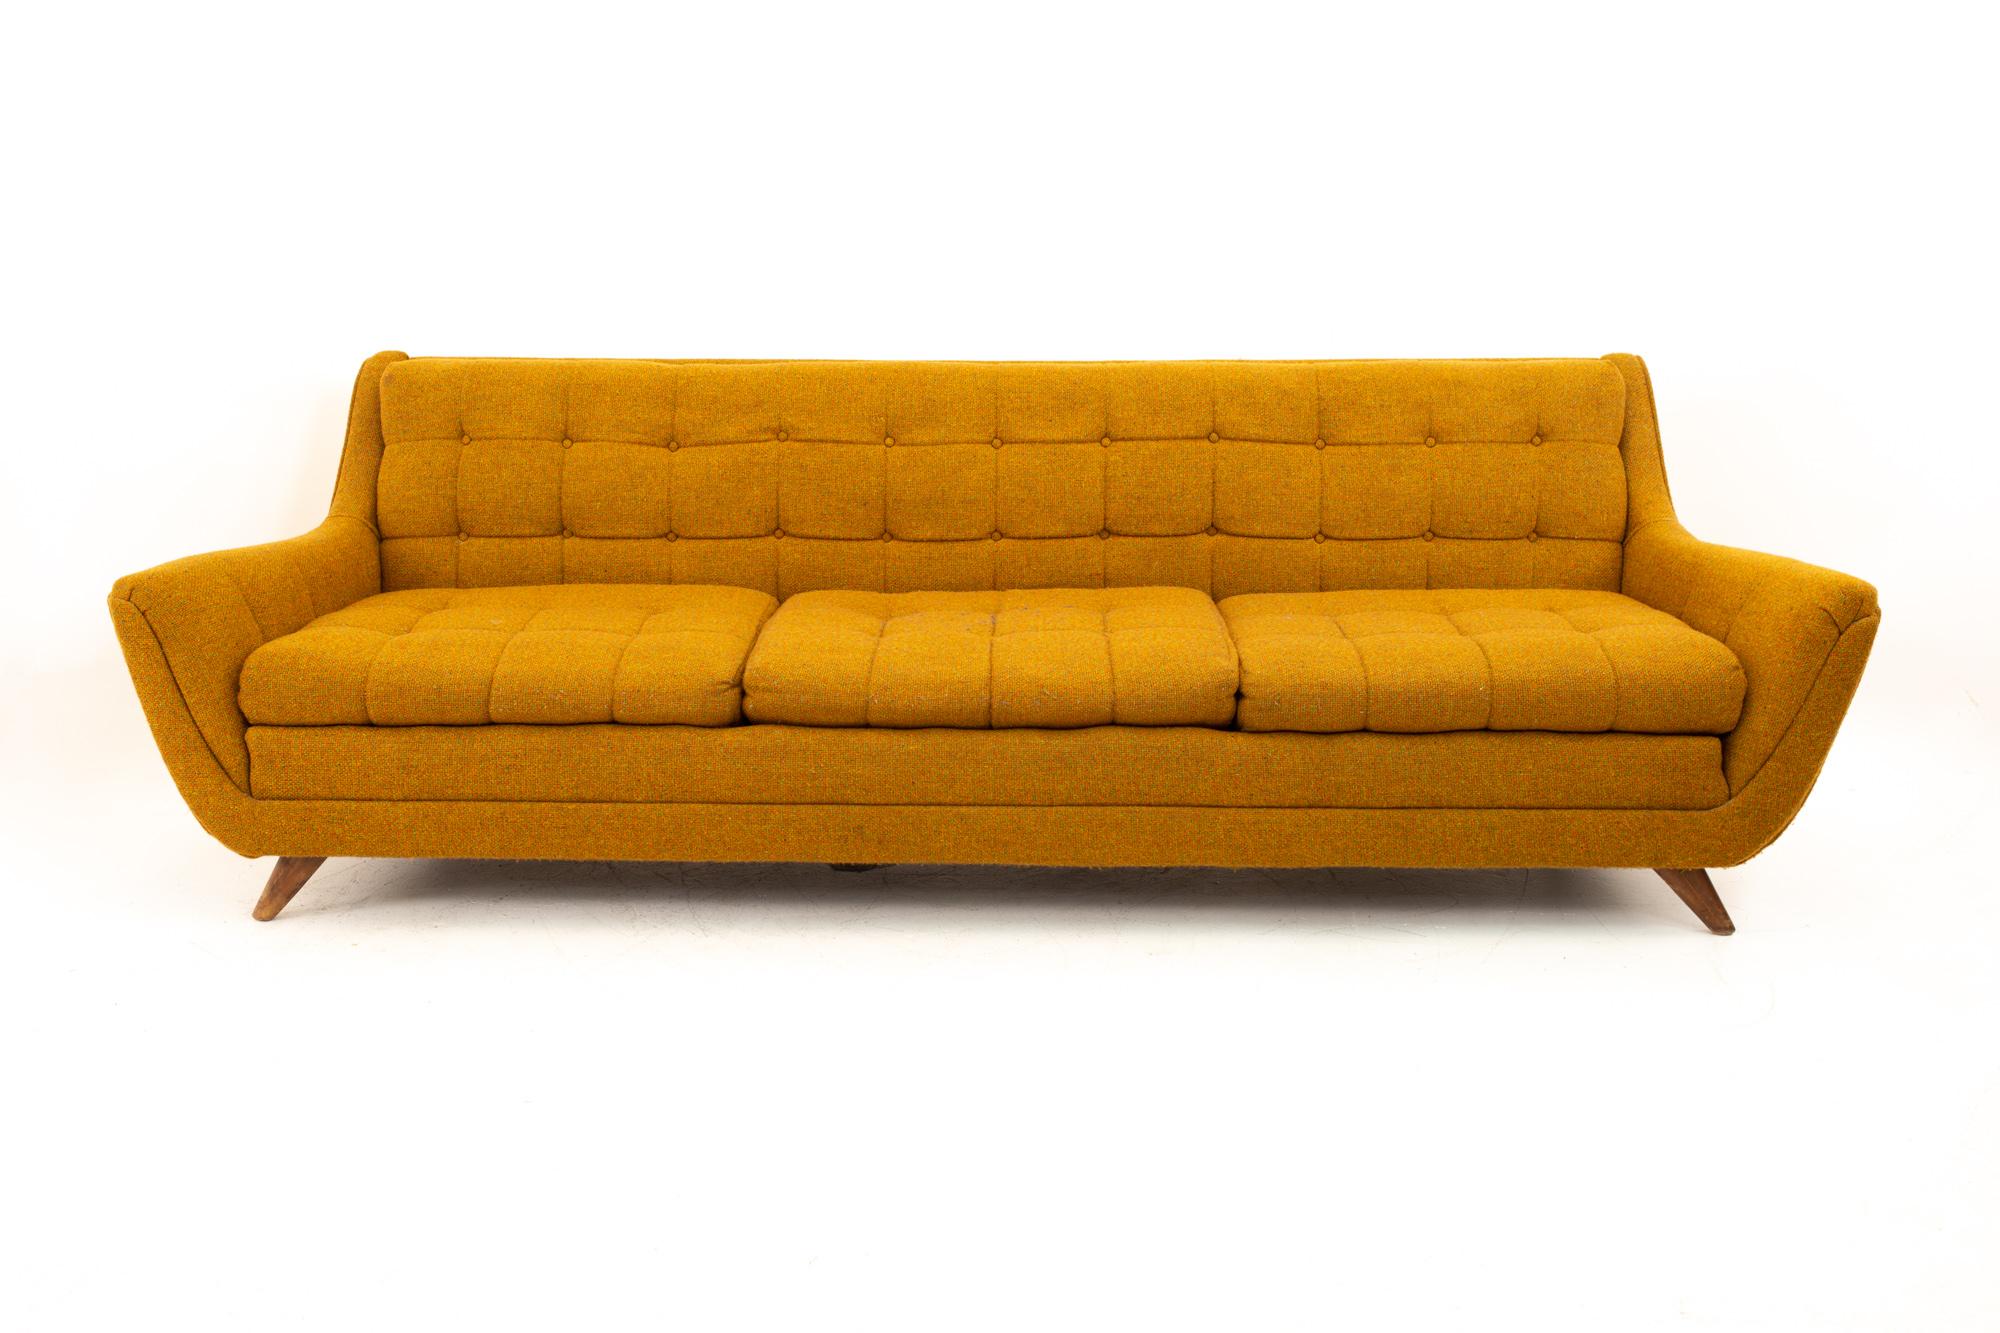 Adrian Pearsall style norwalk furniture midcentury gondola sofa
Sofa measures: 95 wide x 33.5 deep x 30 high, with a seat height of 15 inches

This piece is available in what we call restored vintage condition. Upon purchase it is thoroughly